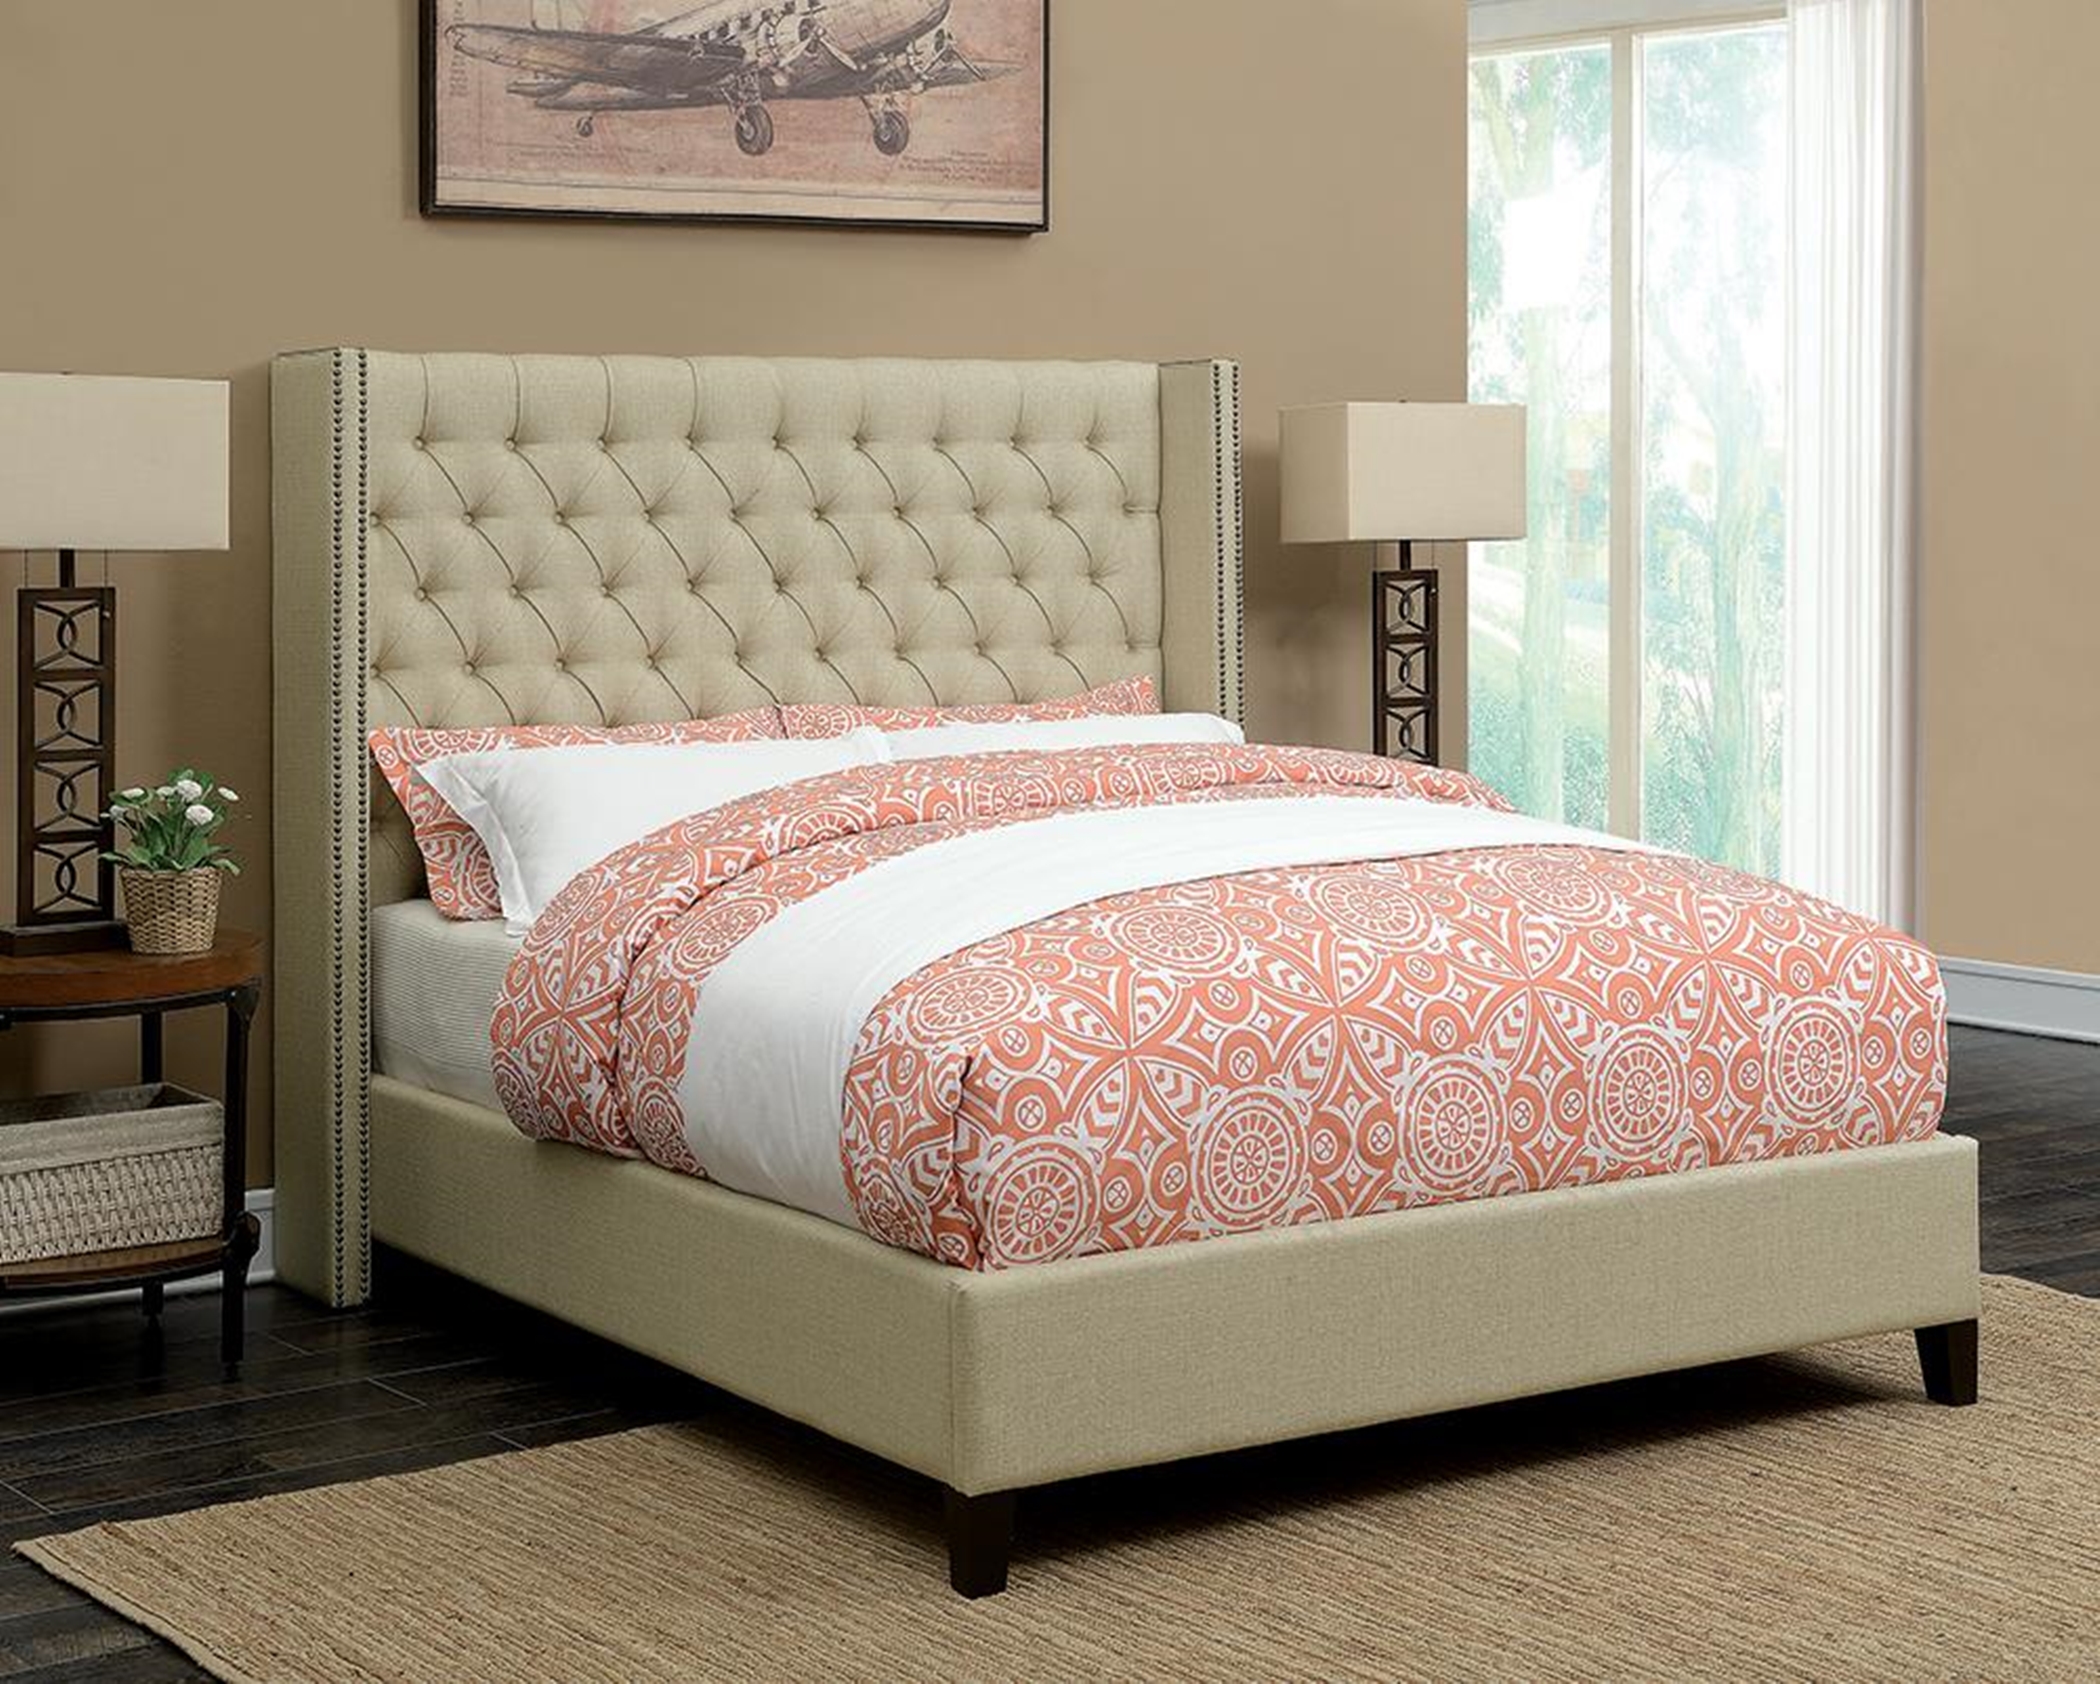 Benicia Beige Upholstered Full Bed - Click Image to Close